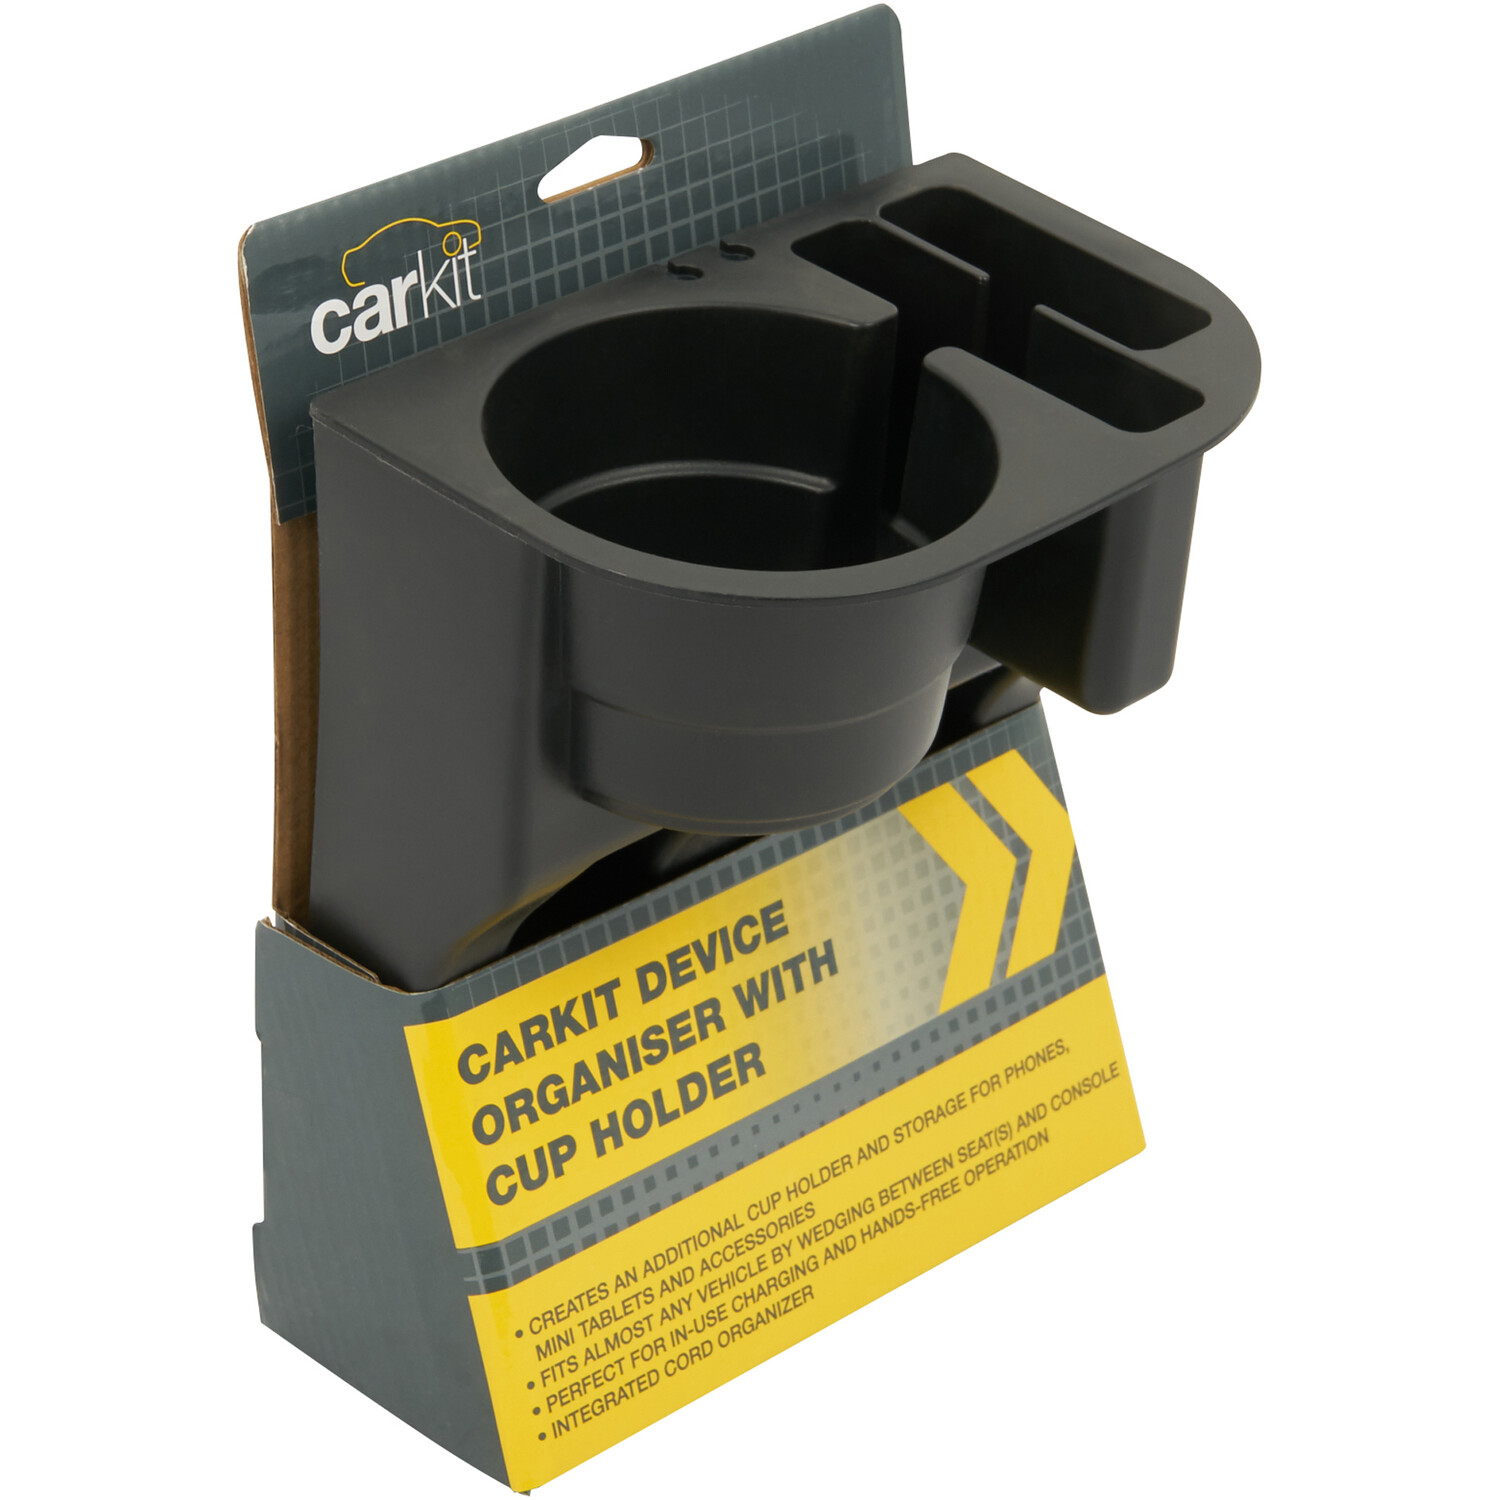 Carkit Device Organiser with Cup Holder Image 2